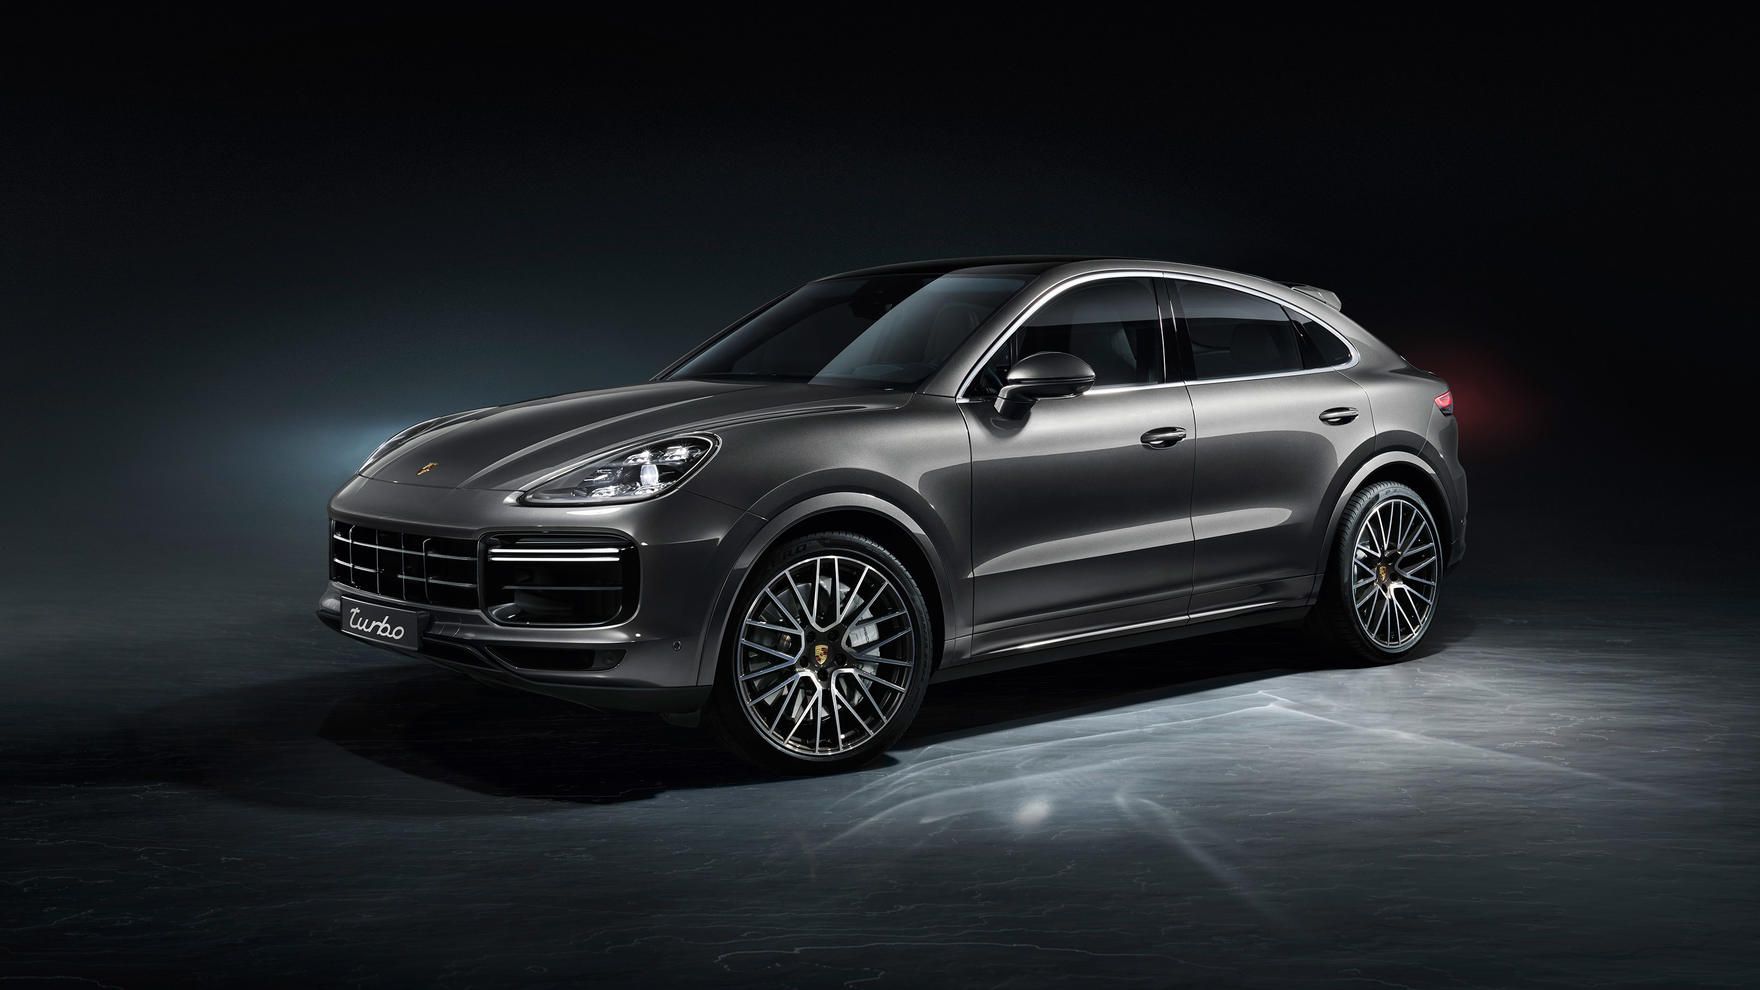 2019 The 2020 Porsche Cayenne Coupe is the BMW X6 rival you didn’t know you wanted